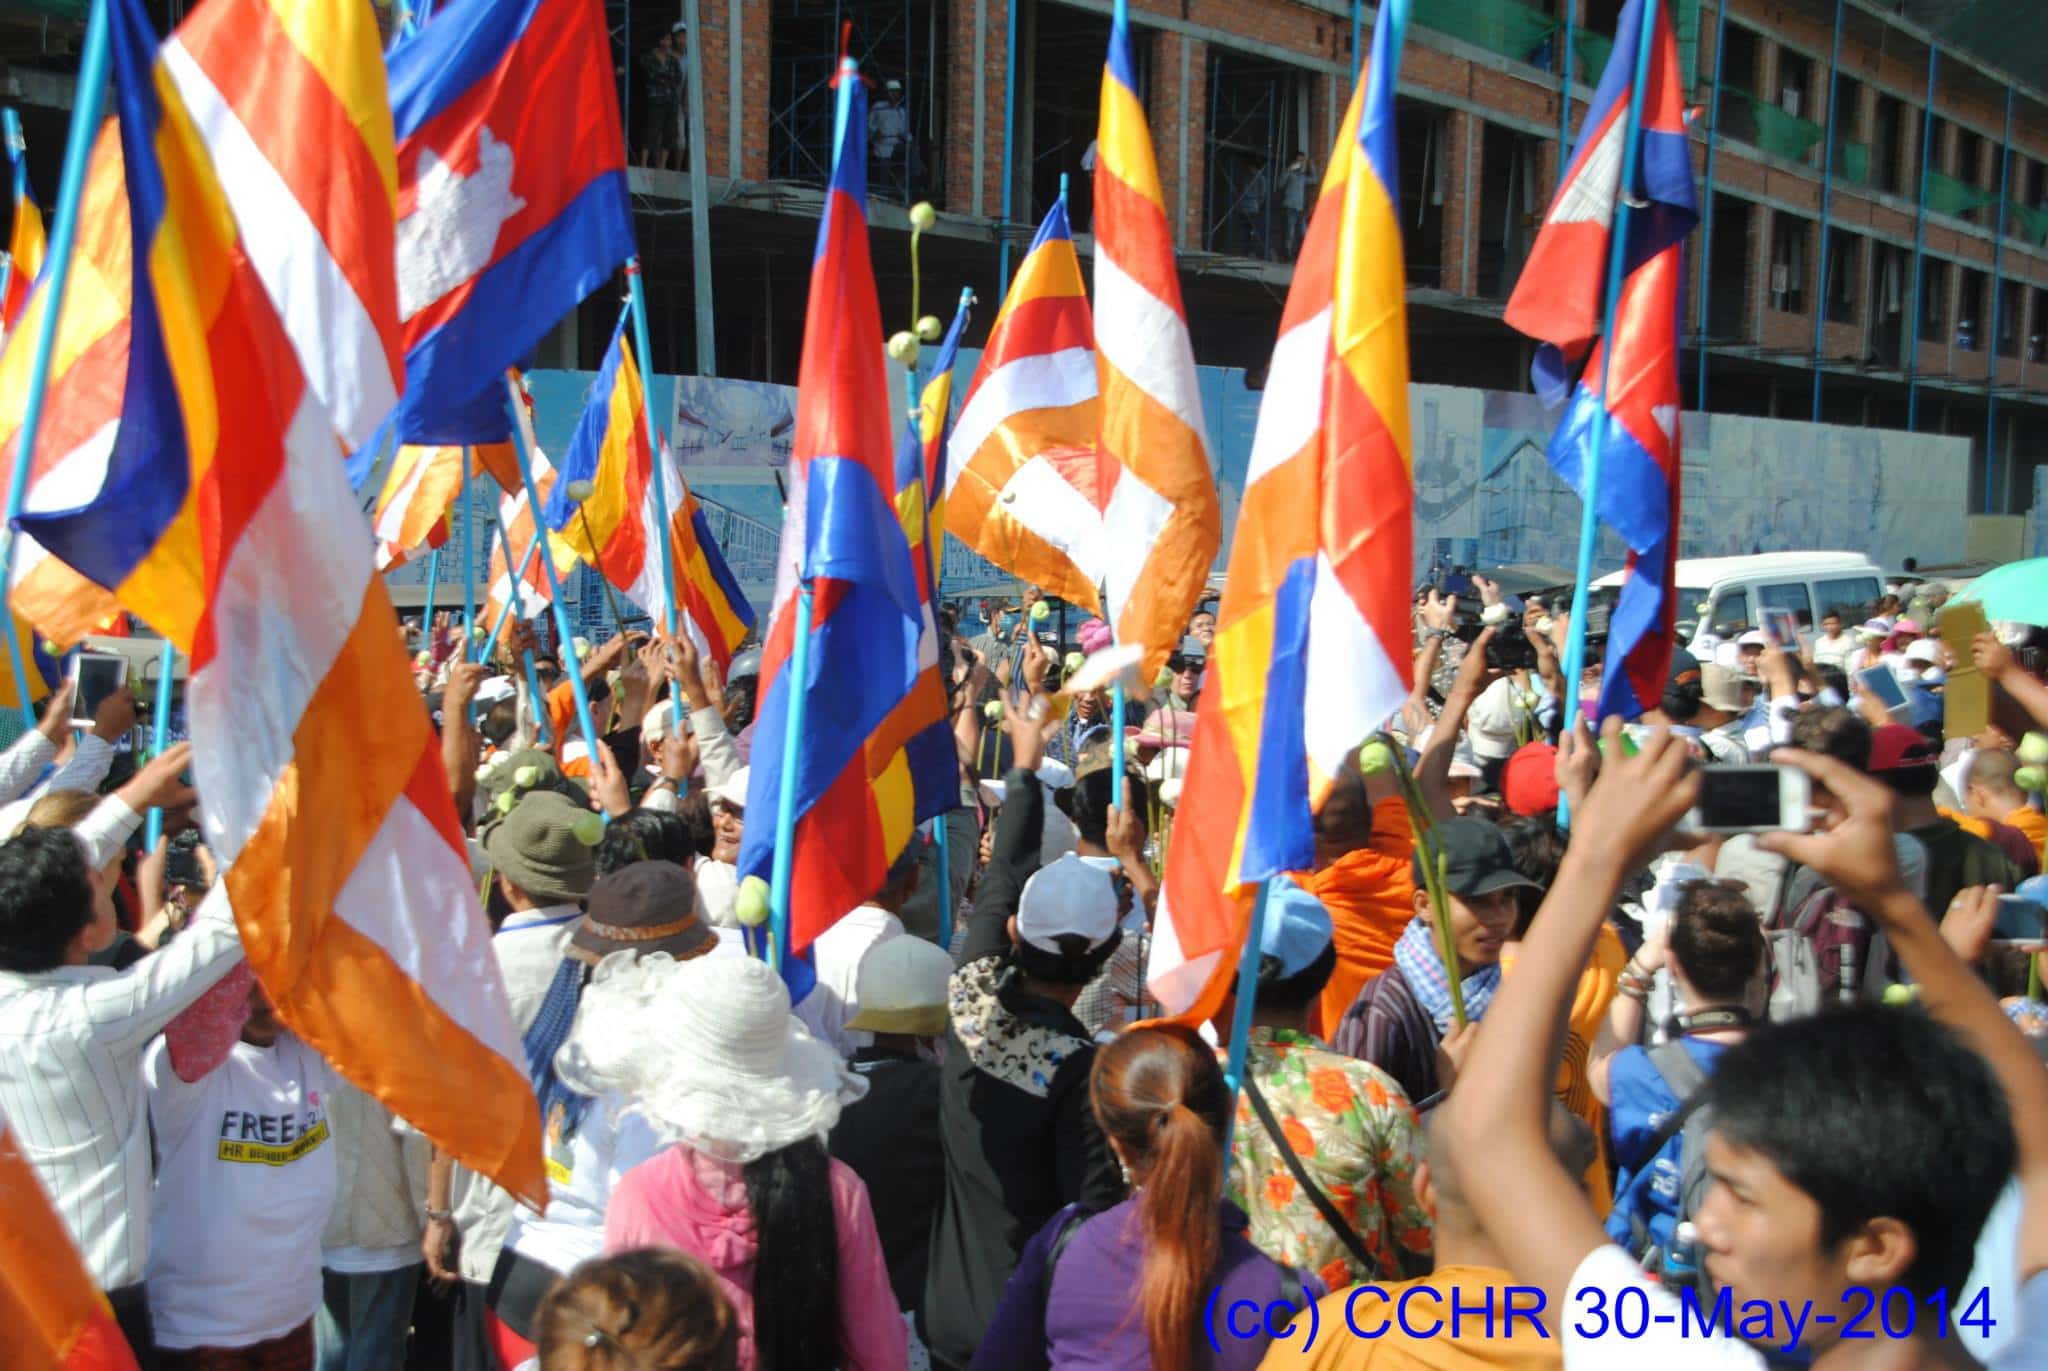 Supporters gathered in Phnom Penh show their enthusiasm upon hearing of the release of the 23 activists, 30 May 2014, CCHR